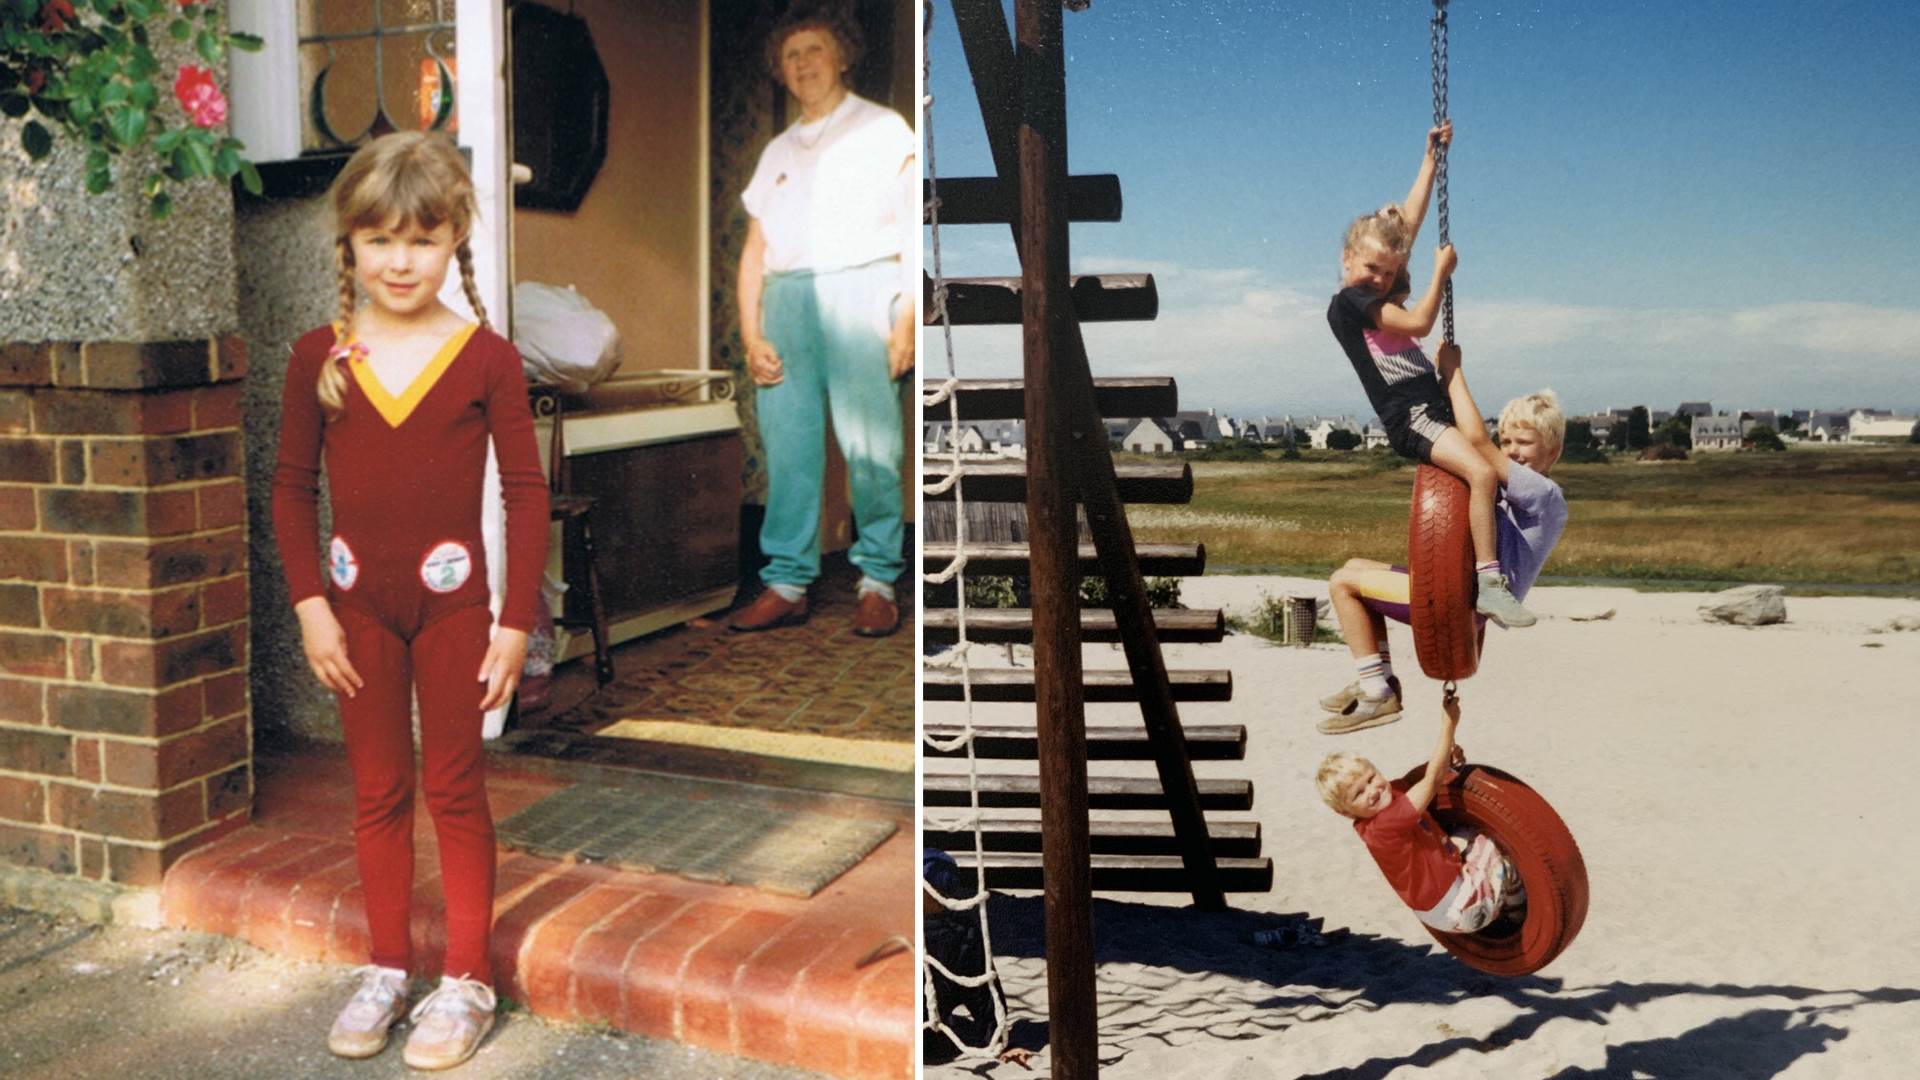 Anna as a child with her gymnastics patches and performing daredevil stunts with her brothers